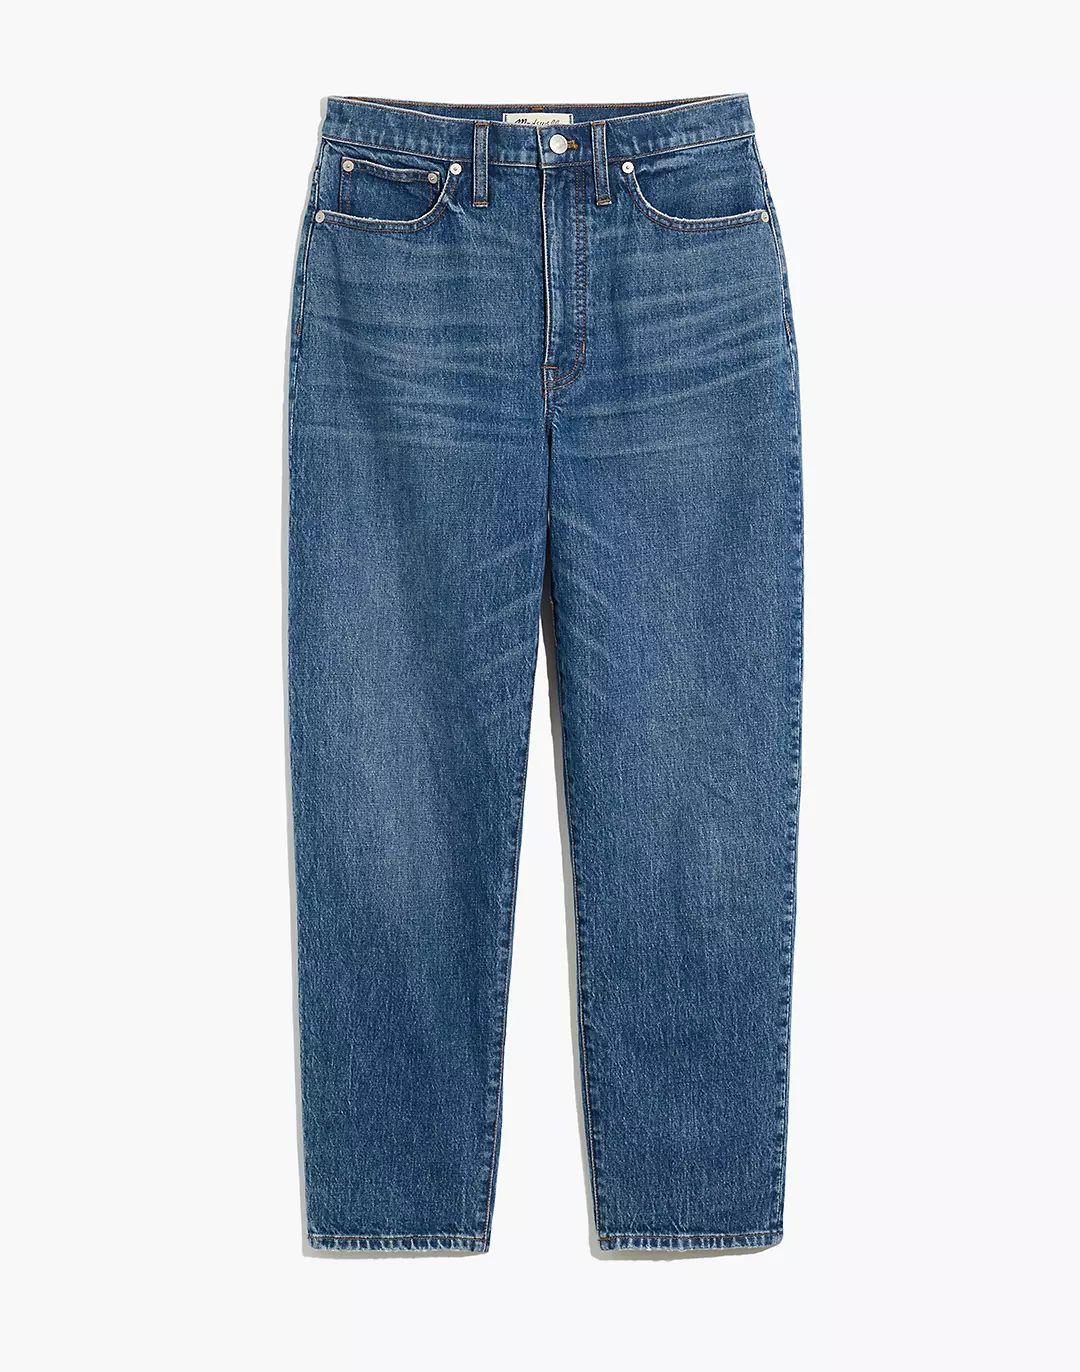 Balloon Jeans in Corson Wash | Madewell